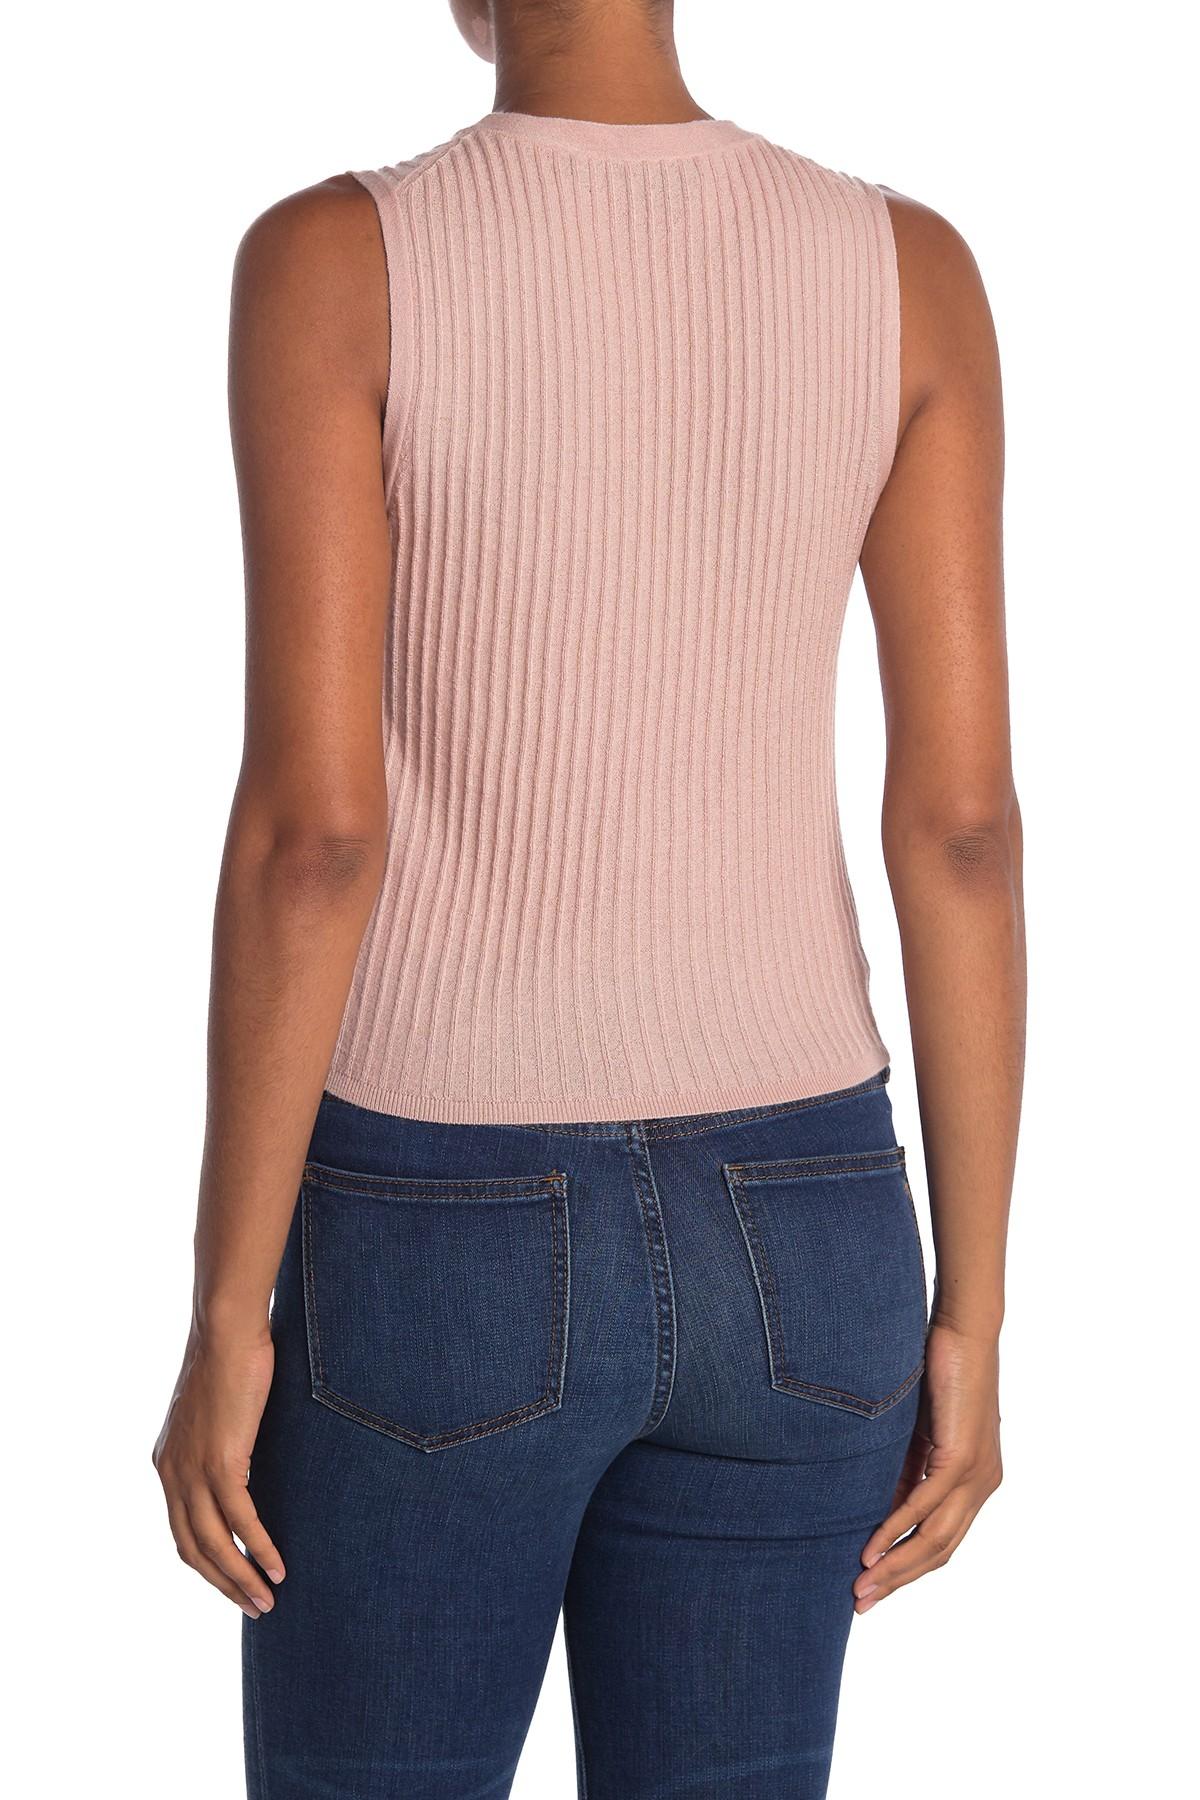 360cashmere Solene Ribbed Cashmere Tank Top in Blue - Lyst